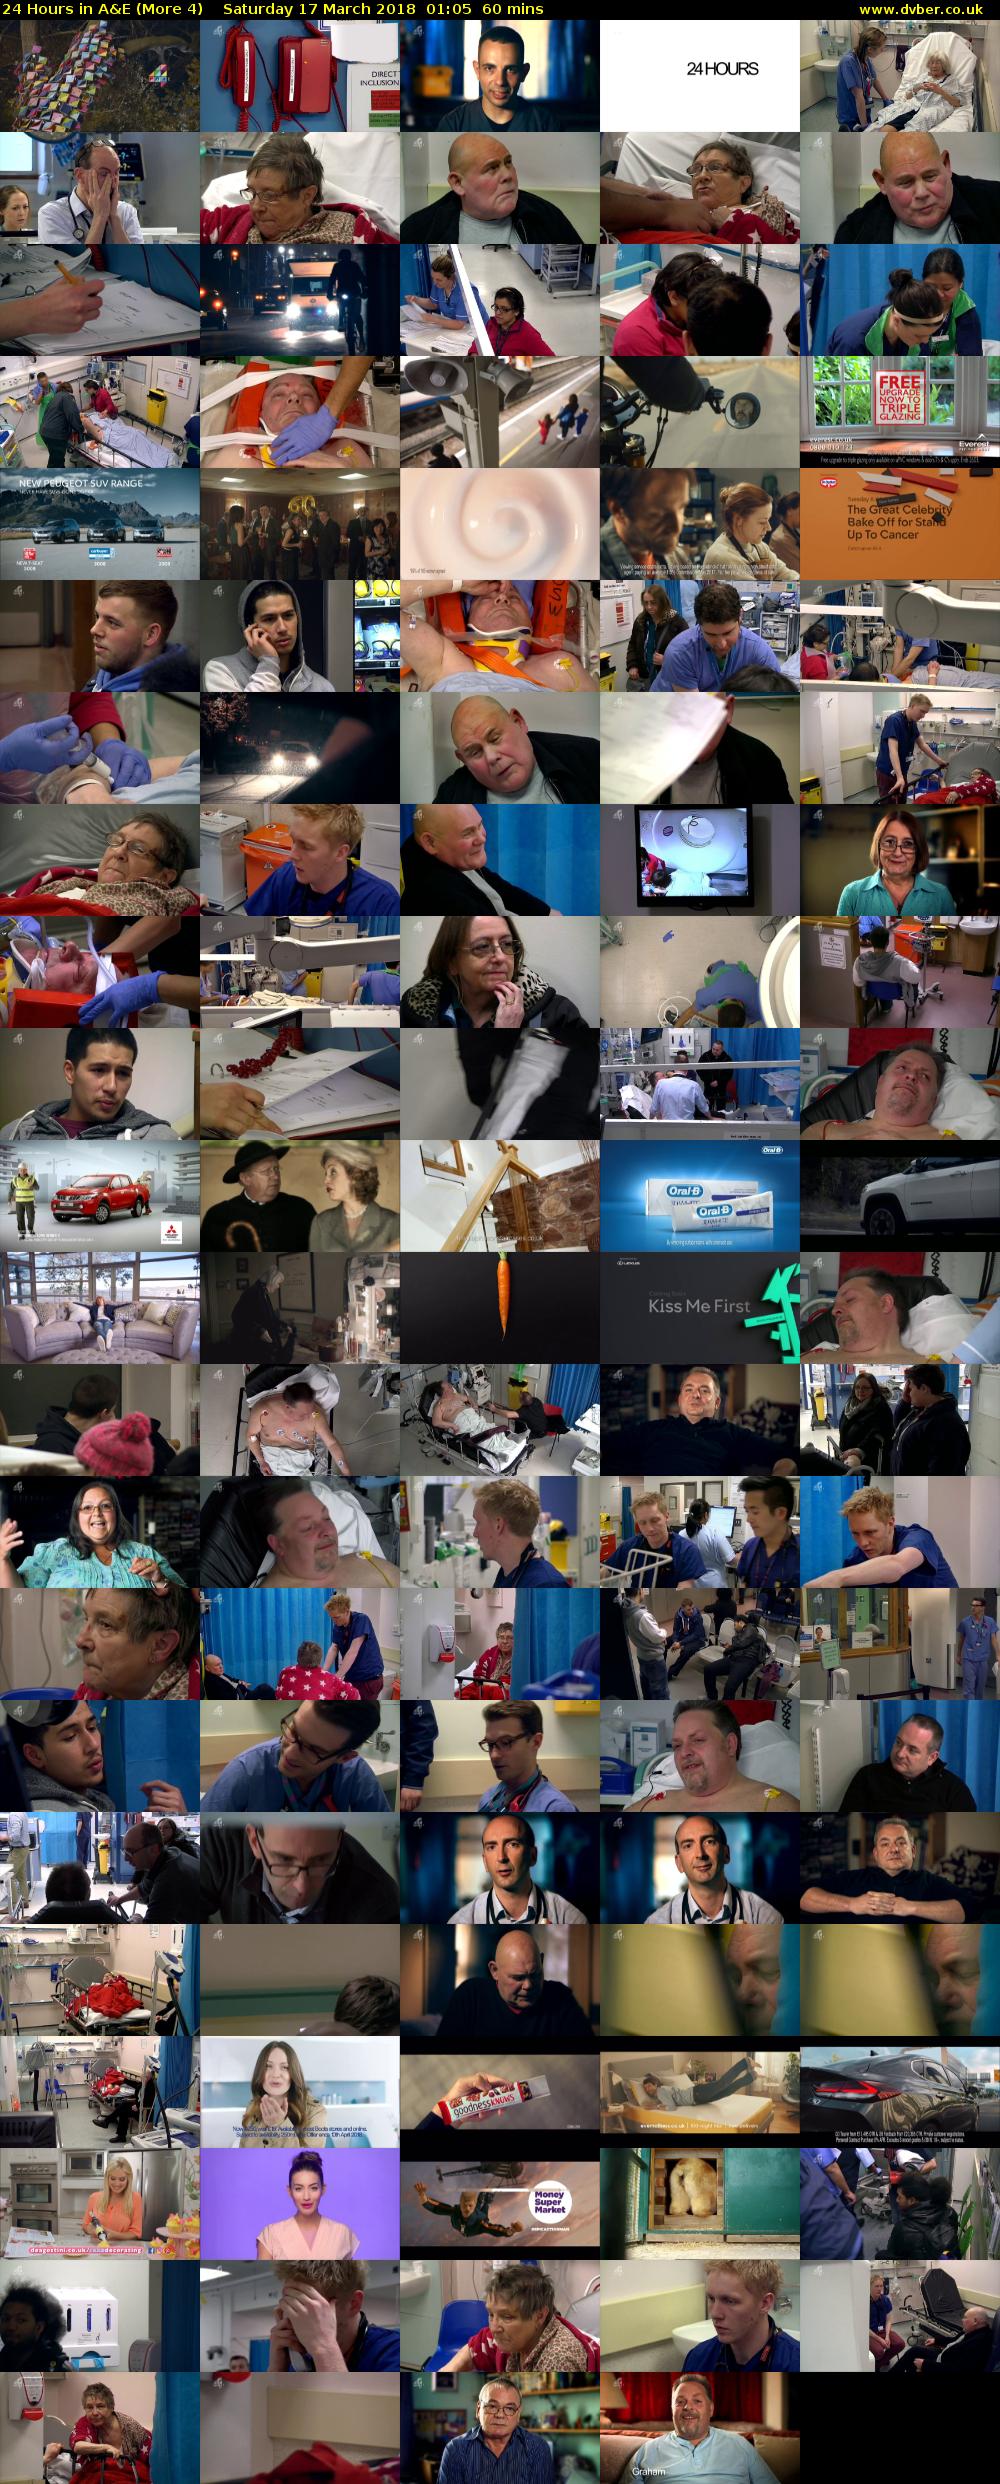 24 Hours in A&E (More 4) Saturday 17 March 2018 01:05 - 02:05